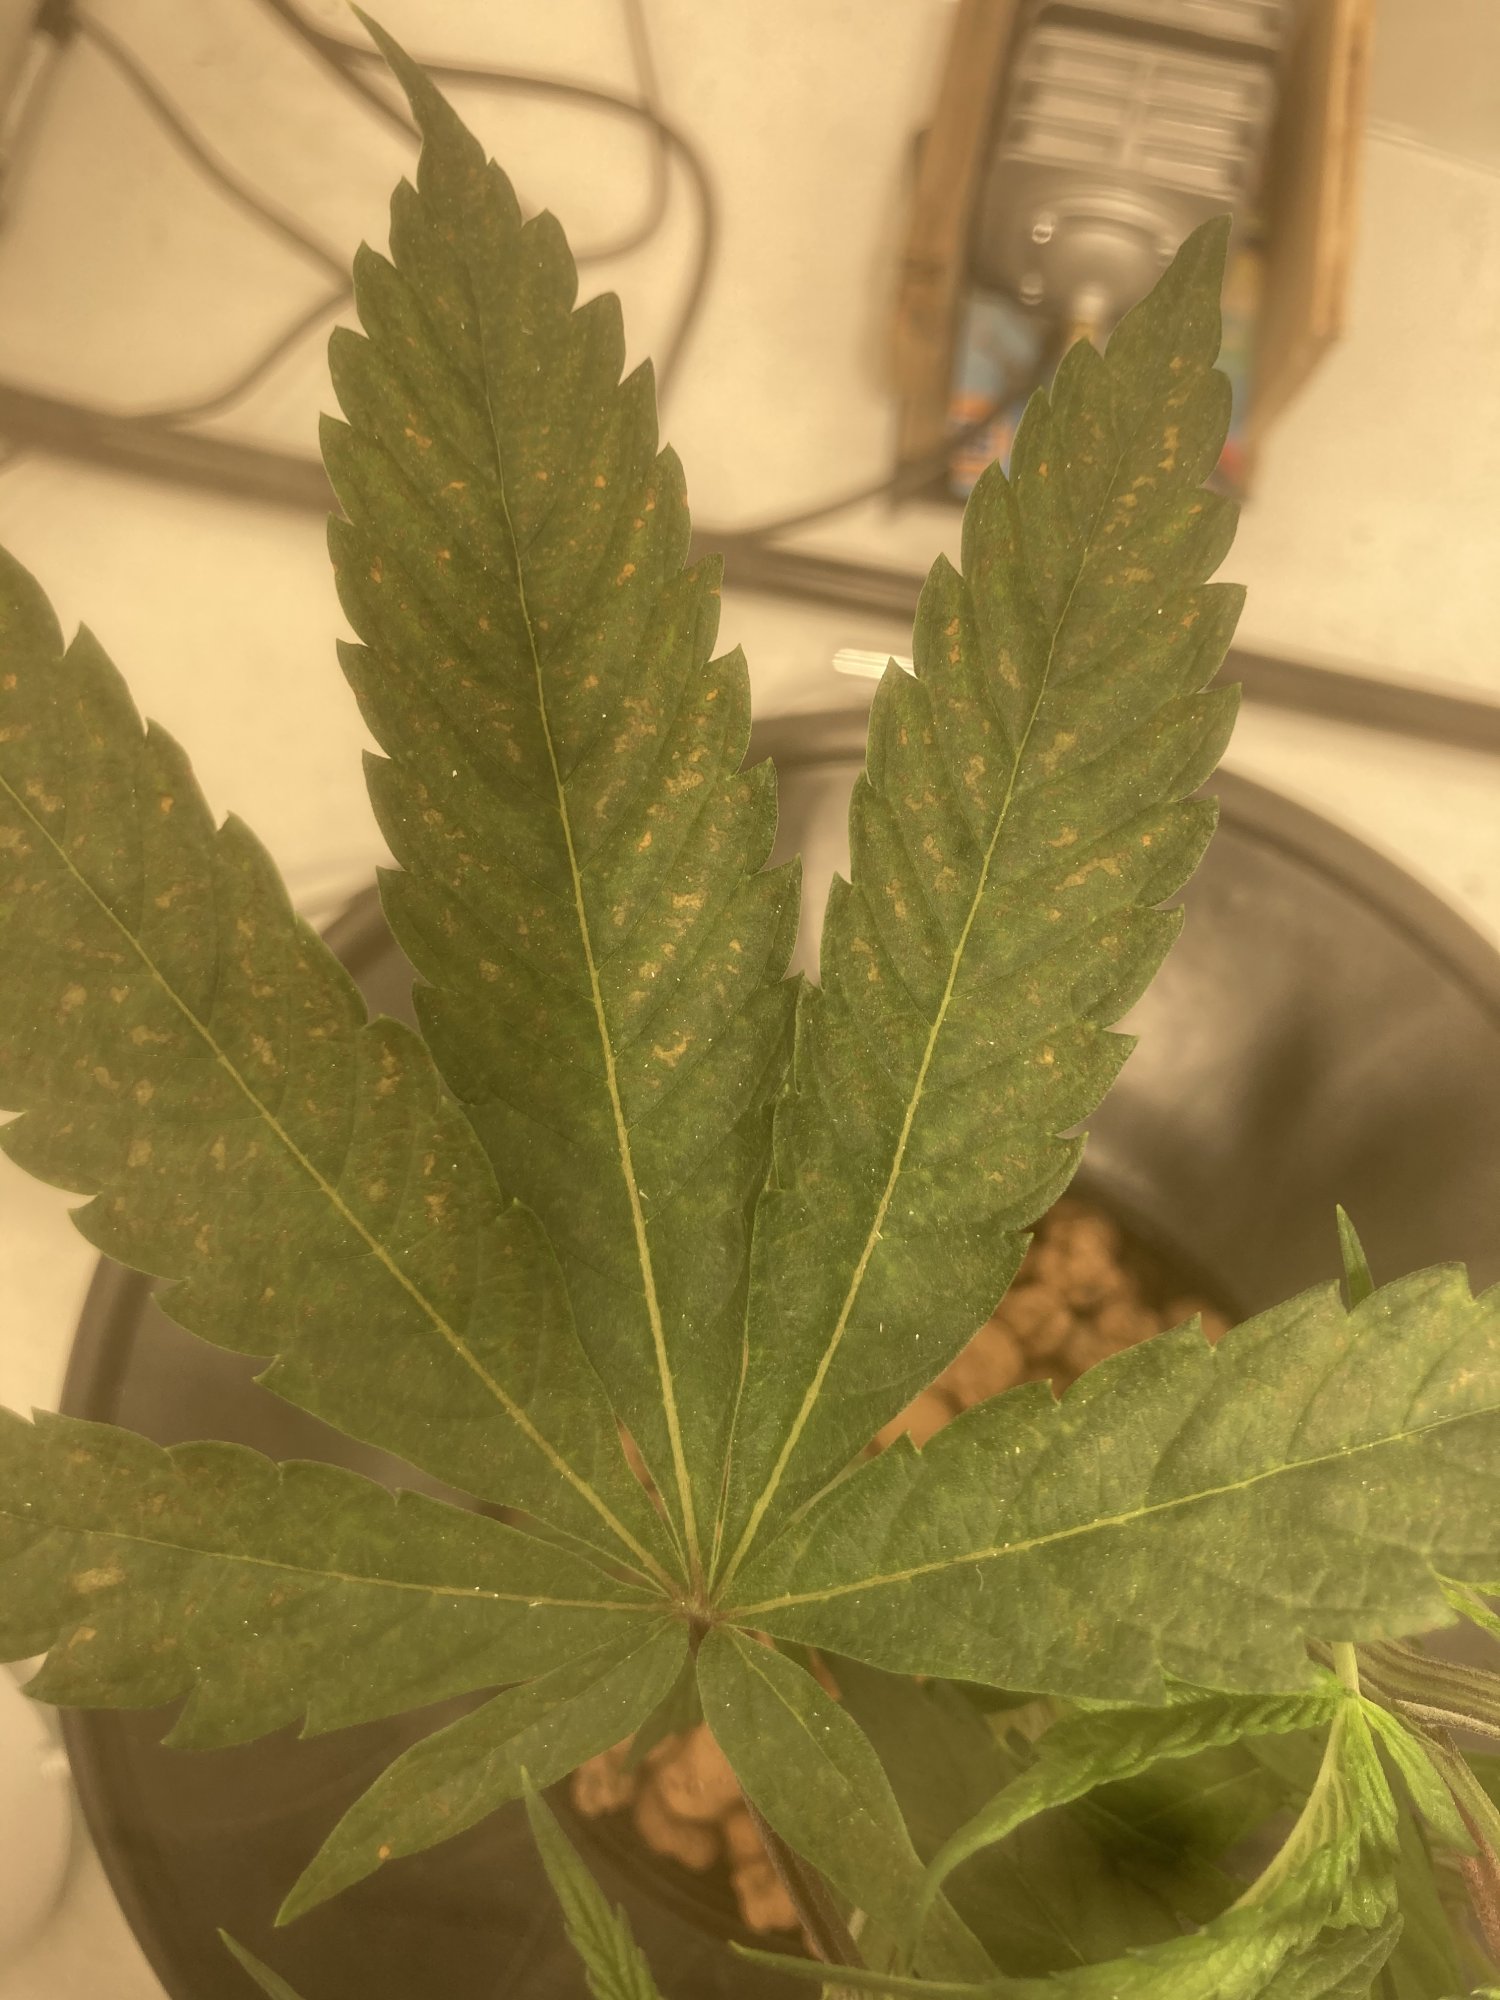 Water nute or ph issue